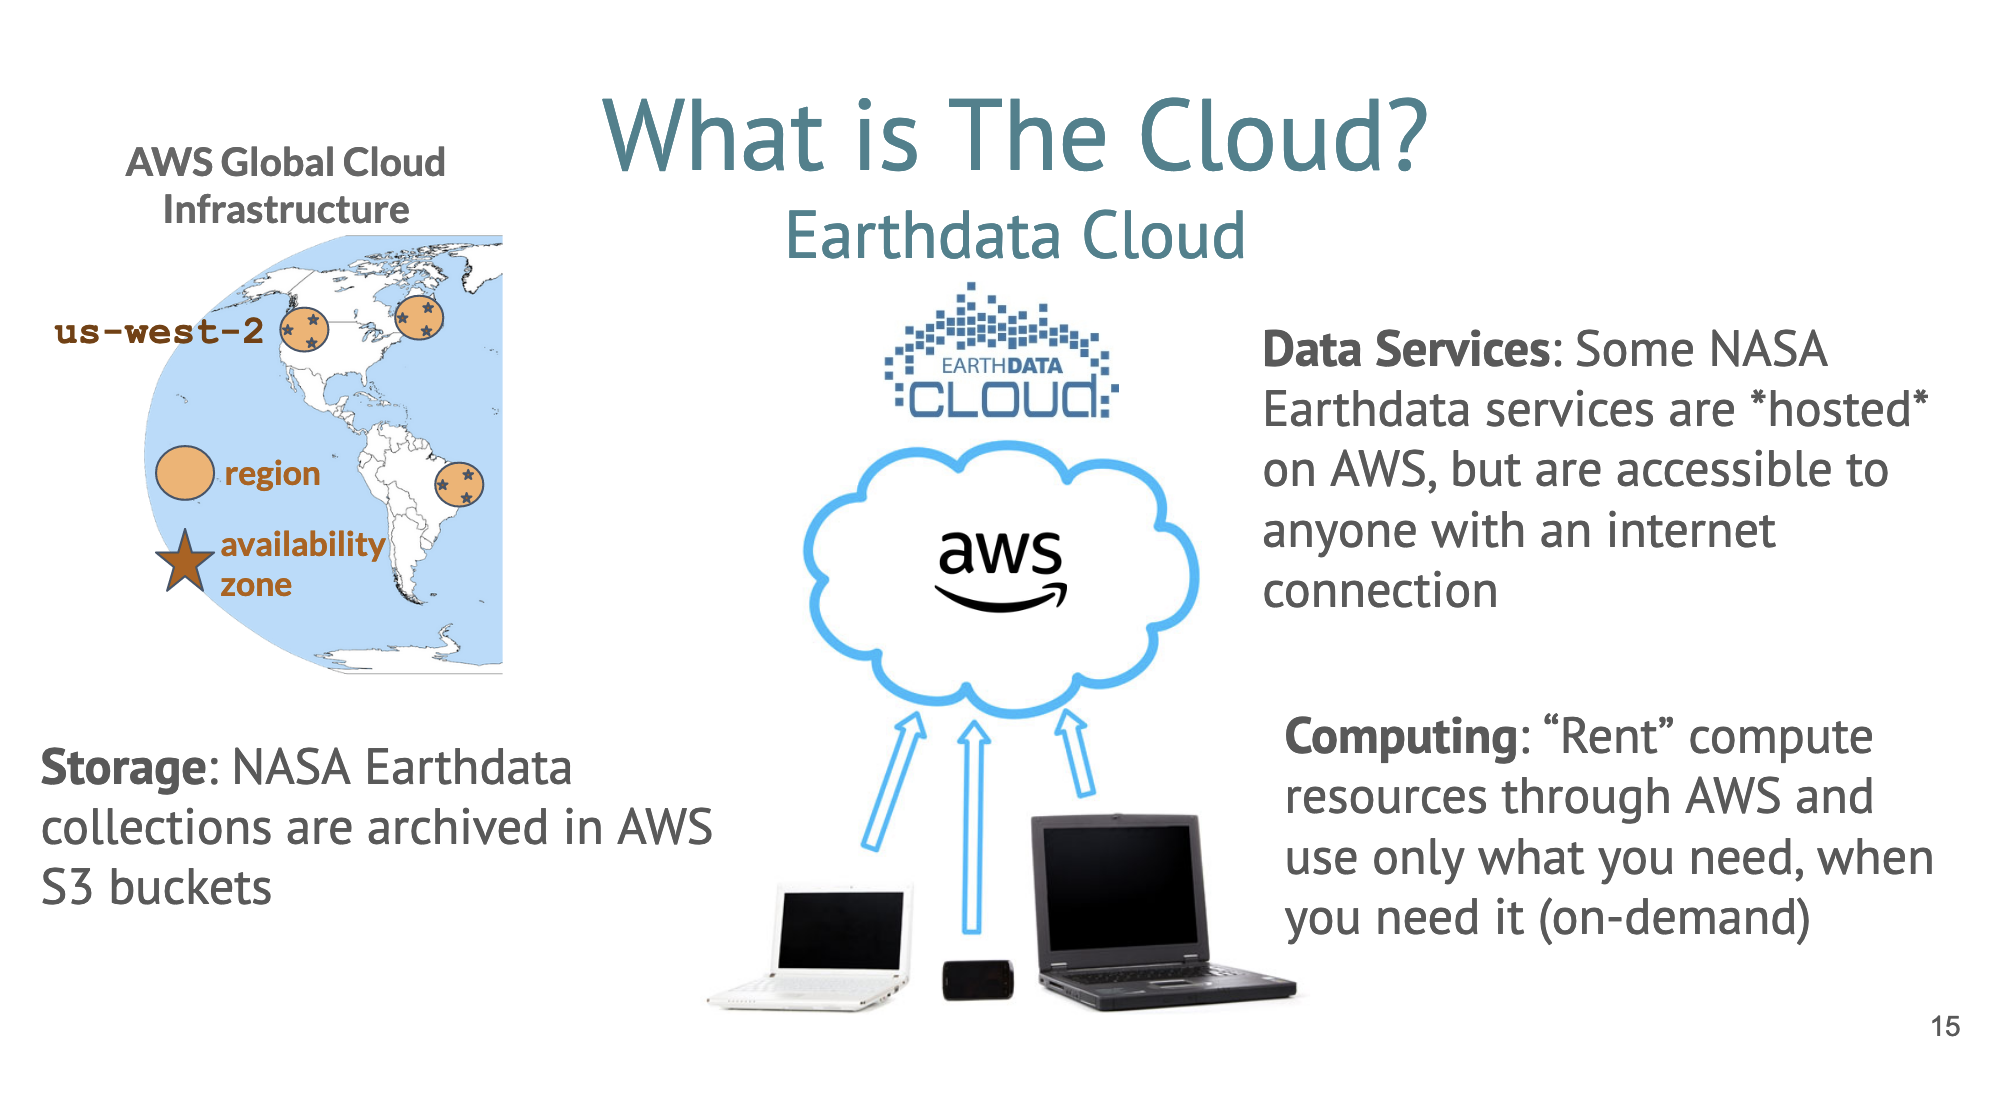 slide screenshot titled 'What is the Cloud?' has central image of computer devices pointing up to a cloud. Left side shows imaage of North and South America with locations of AWS Global Cloud Infrastructure. Right side says 'Data Services: Some NASA Earthdata services are *hosted* on AWS, but are accessible to anyone with an internet connection' and 'Computing: “Rent” compute resources through AWS and use only what you need, when you need it (on-demand)'